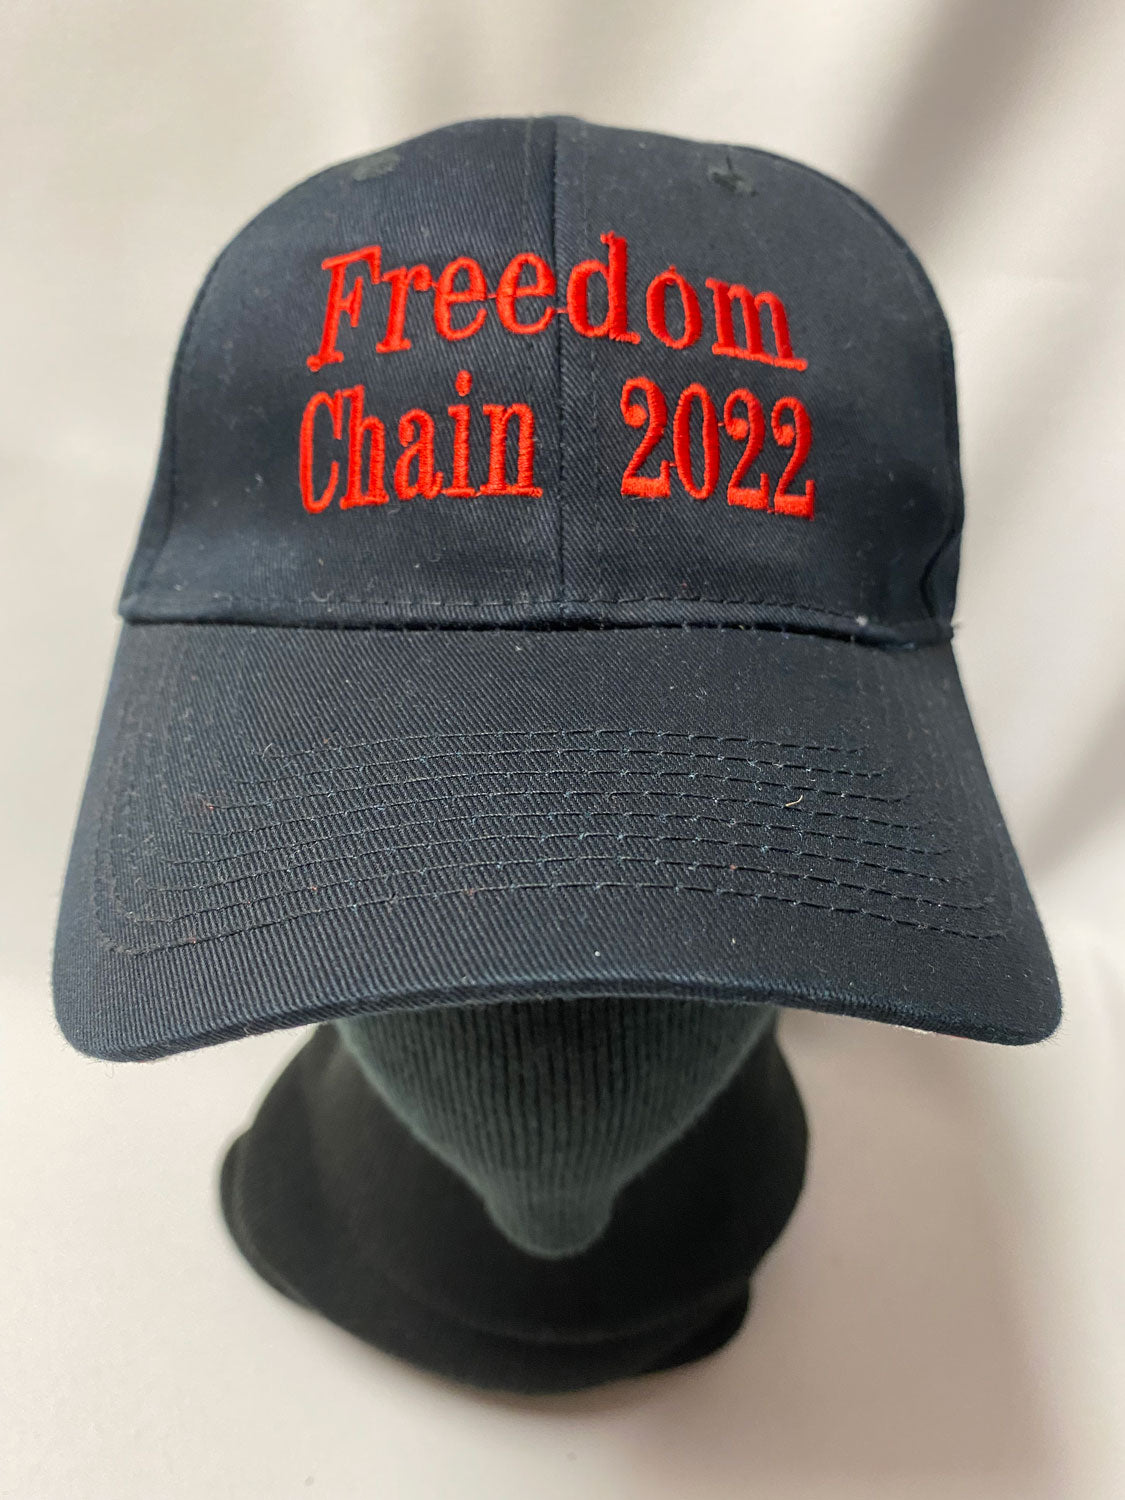 BALL CAP FREEDOM CHAIN 2022 - red embroidery on black